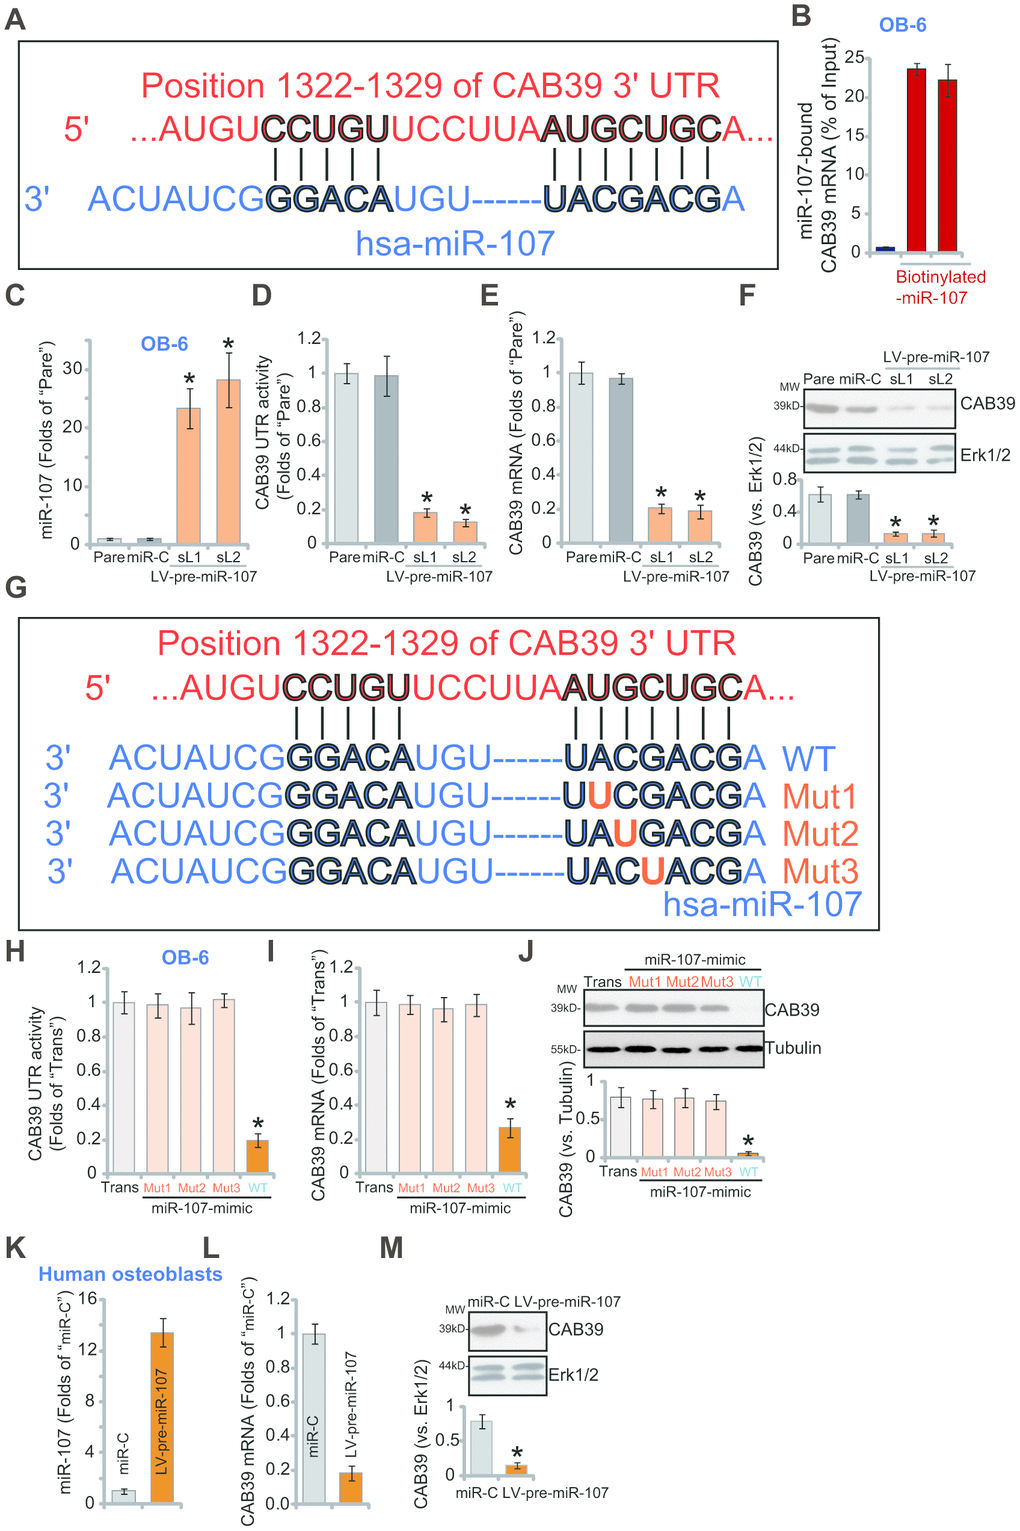 miR-107 targets and silences CAB39 in osteoblasts. The bioinformatics analyses show that miR-107 putatively targets 3’-UTR of human CAB39 (at position of 1322-1329) (A). The RNA-Pull down assay confirmed the binding between the biotinylated-miR-107 and CAB39 mRNA (normalized to the input control) (B). Stable OB-6 cells with pre-miRNA-107 lentivirus (LV-pre-miR-107-sL1/sL2, two stable cell lines) or non-sense microRNA control lentivirus (“miR-C”, same for all Figures), as well as the parental control OB-6 cells (“Pare”, same for all Figures), were cultured, expression of miRNA-107 and CAB39 was tested by qPCR (C and E) and Western blotting (F) assays, with relative CAB39 3’-UTR luciferase activity (D) examined as well. OB-6 cells were transfected with 500 nM of the applied miR-107 mimics (sequences listed in G) for 48h, CAB39 3’-UTR luciferase activity (H) and its expression (I and J) were tested. The primary human osteoblasts were infected with pre-miRNA-107 lentivirus (LV-pre-miR-107) or miR-C, after 48h expression of listed genes was shown (K–M). Data were mean ± standard deviation (SD, n=5). “Trans” stands for the transfection reagent control (H–J). * pvs. “miR-C”/“Trans” cells. Each experiment was repeated three times and similar results were obtained.